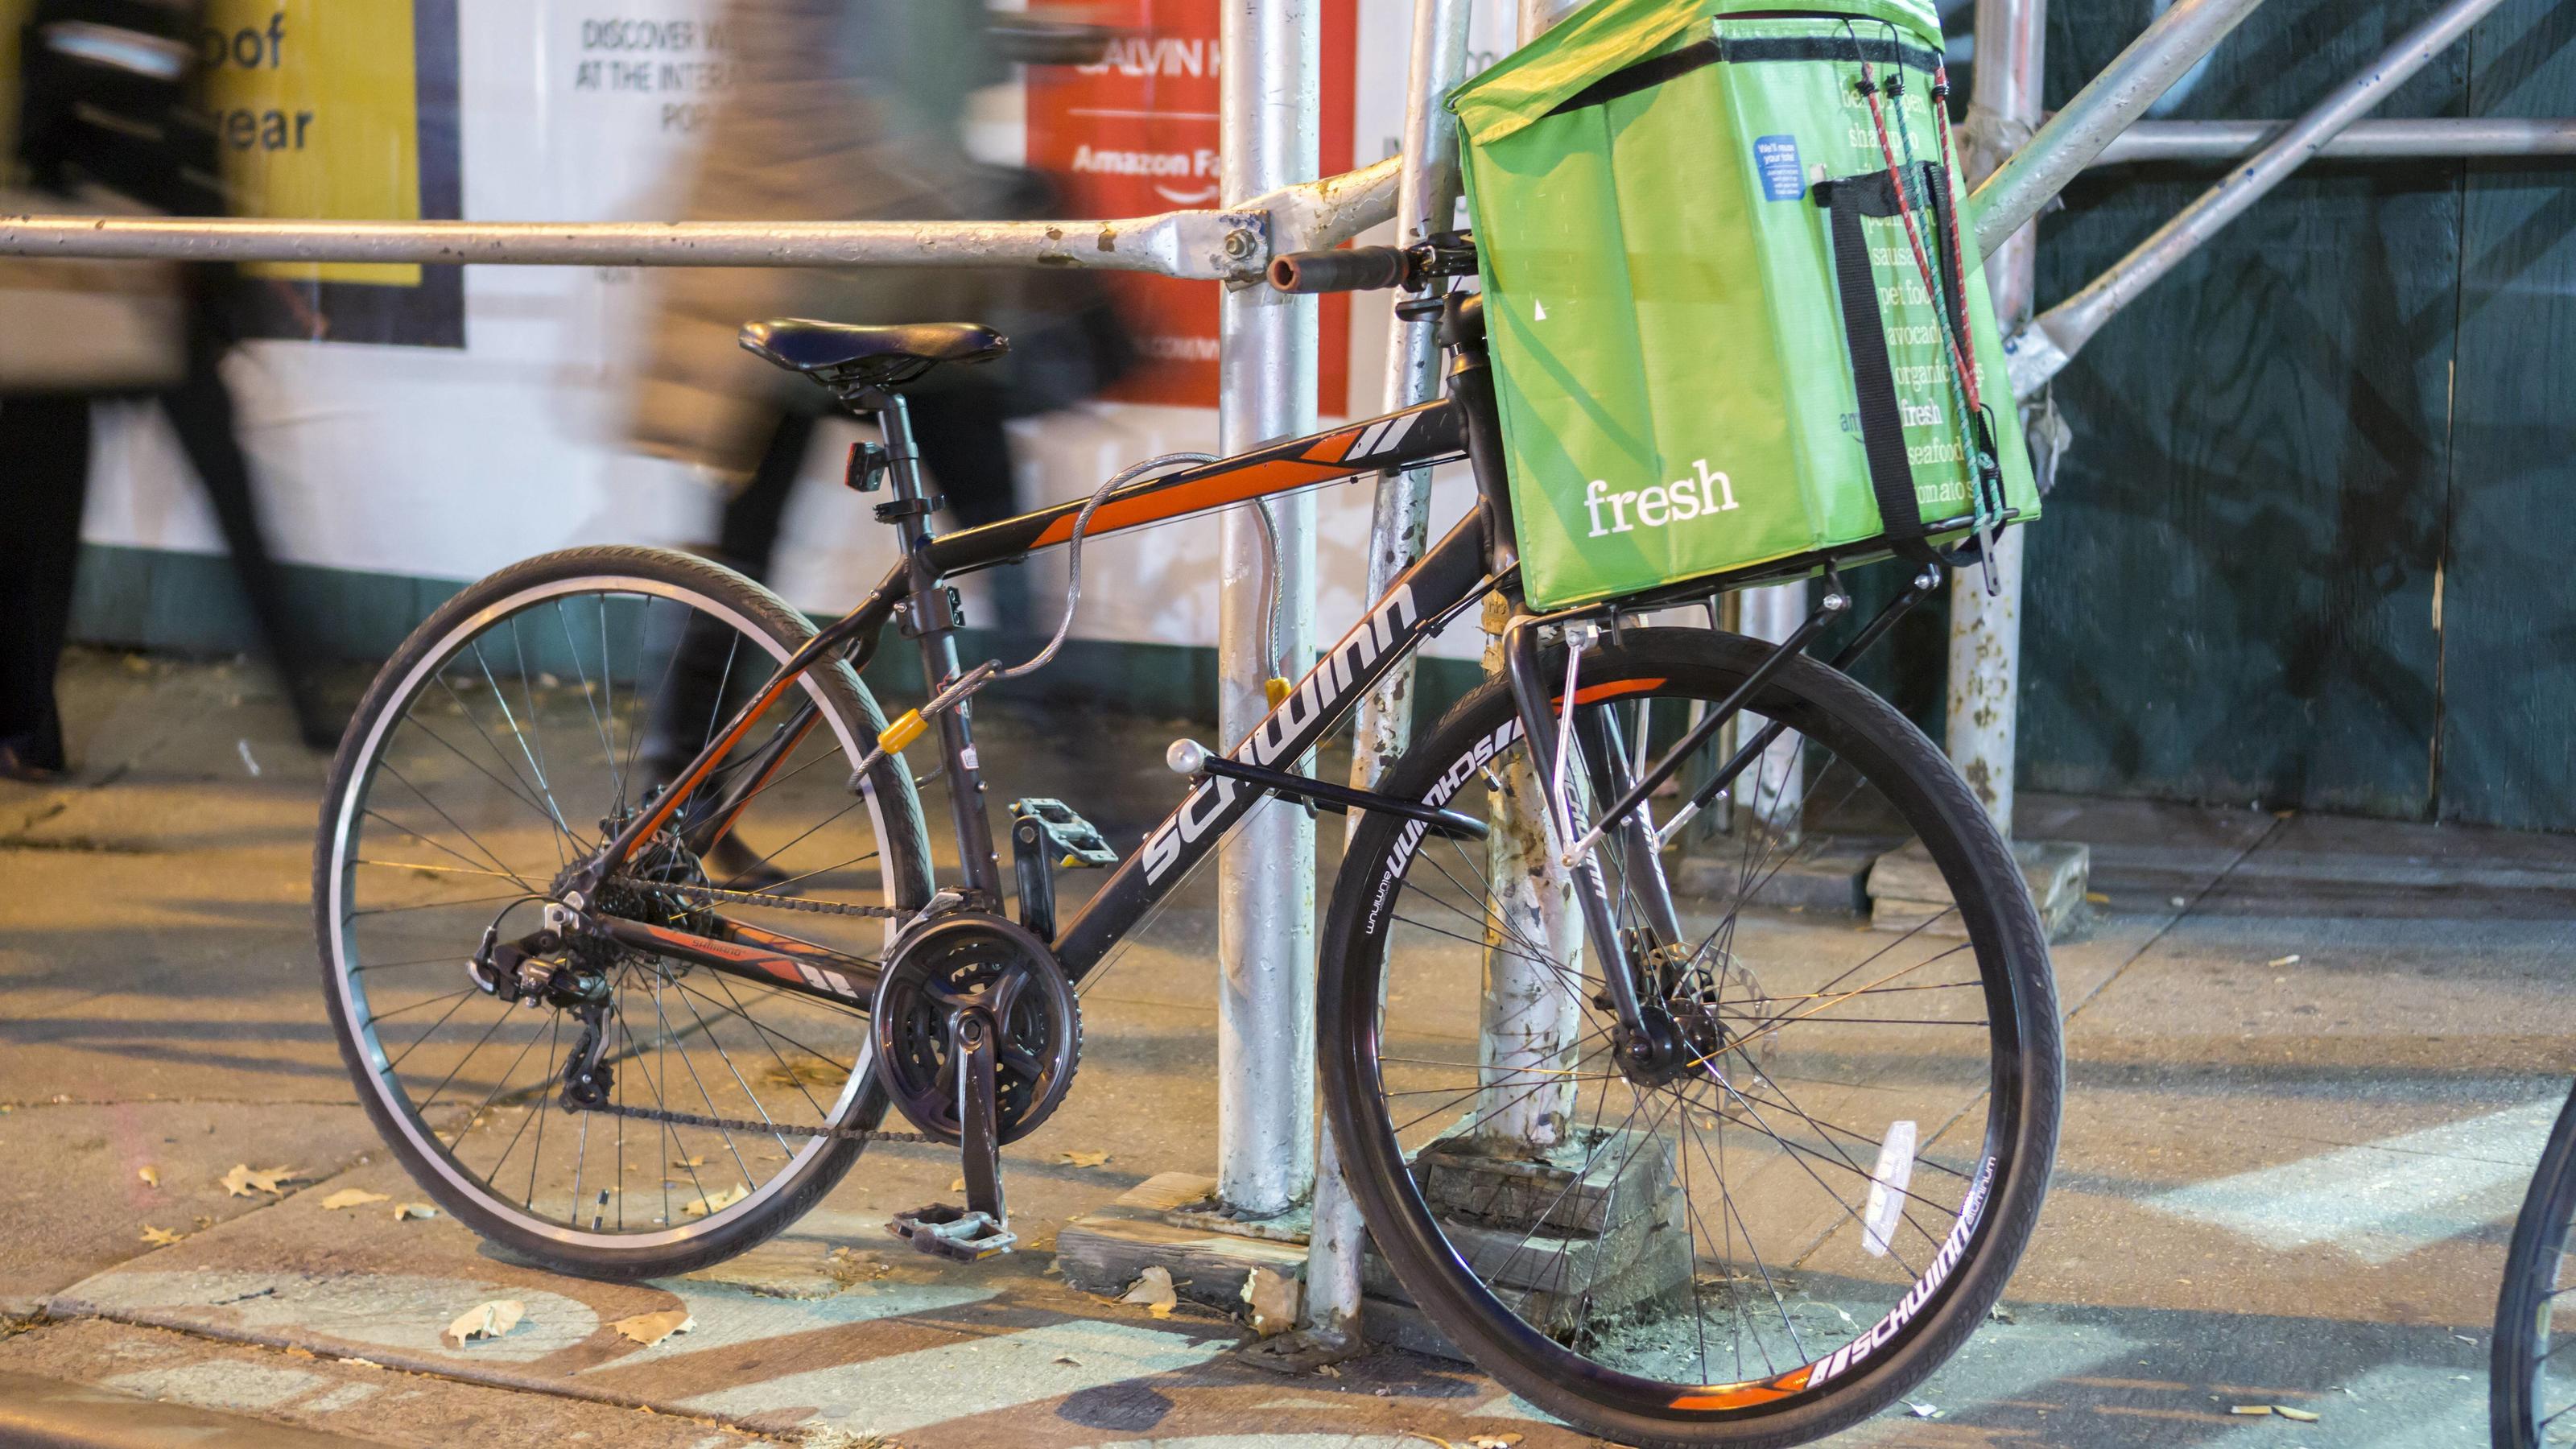 Amazon Fresh in New York A bicycle with a tote from Amazon Fresh in New York on Friday, November 17, 2017. Online groceries are considered to be one of the hottest segments of retail. ( PUBLICATIONxNOTxINxUSAxUK RichardxB.xLevine  